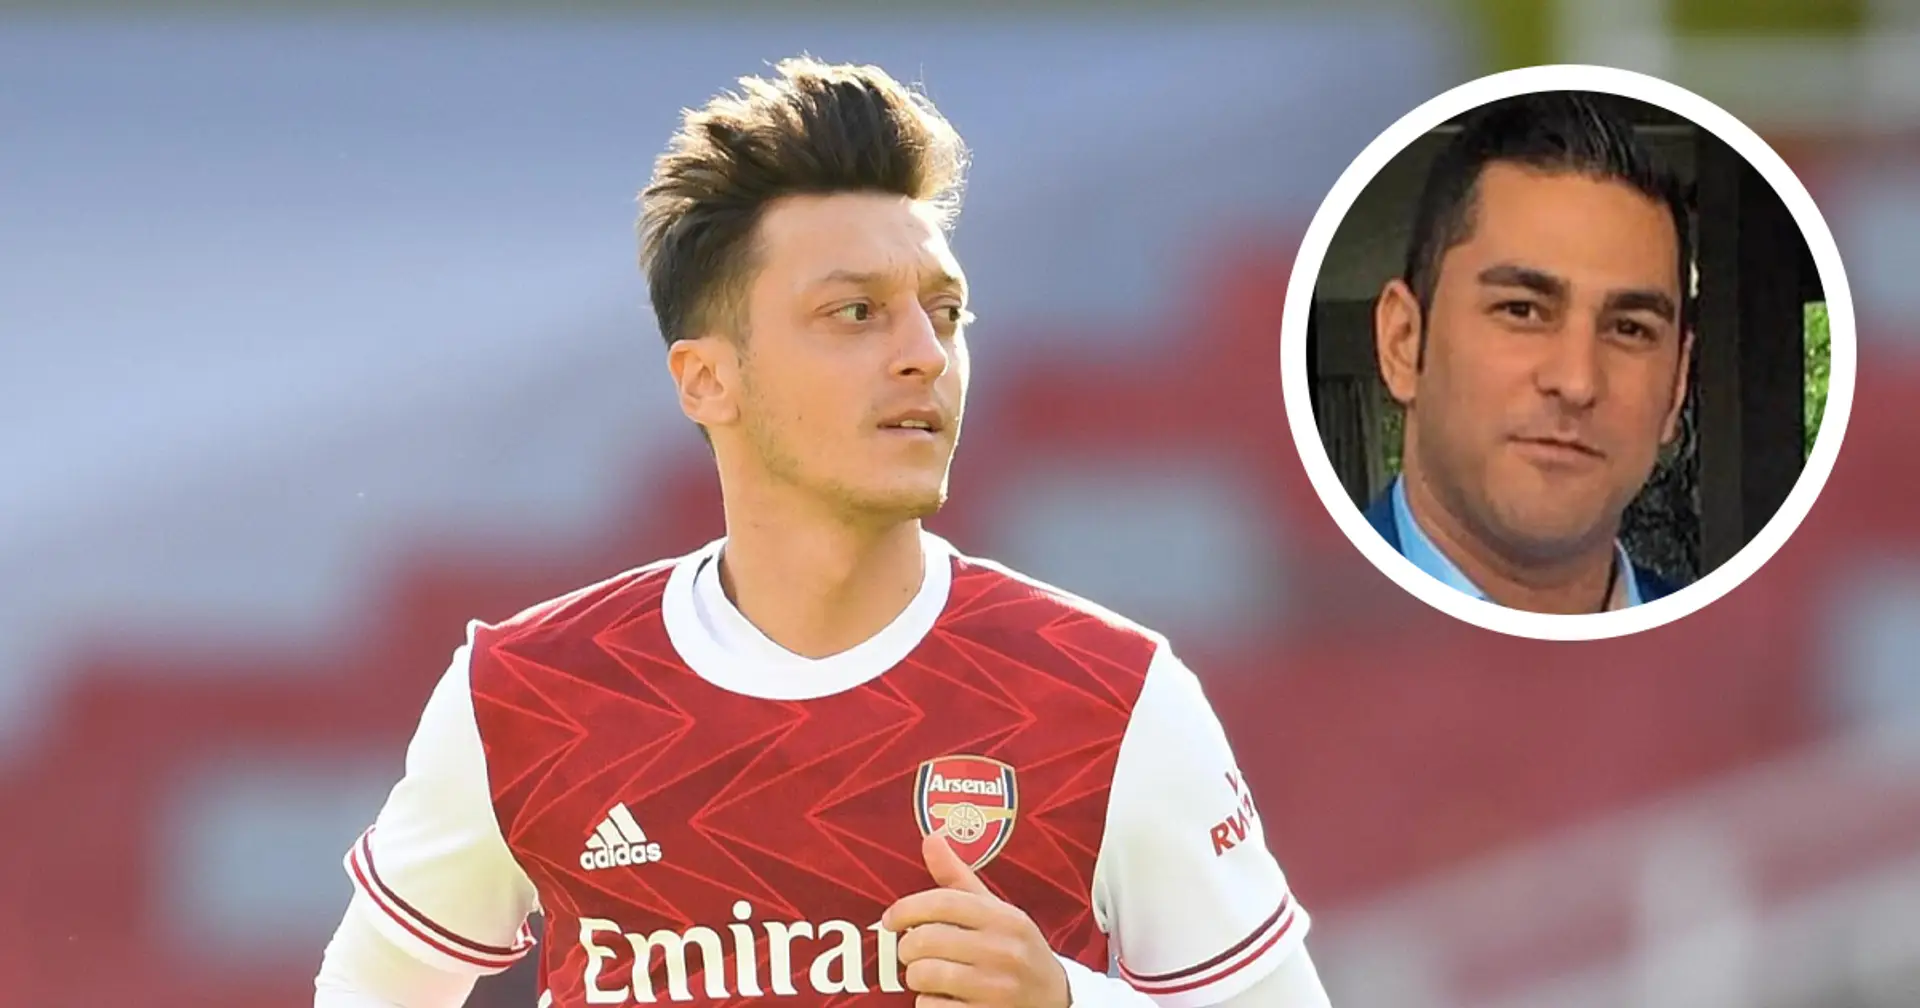 Mesut Ozil's agent: 'Mesut's priority is to stay. In the next seven to ten days, the situation will be a little clearer'